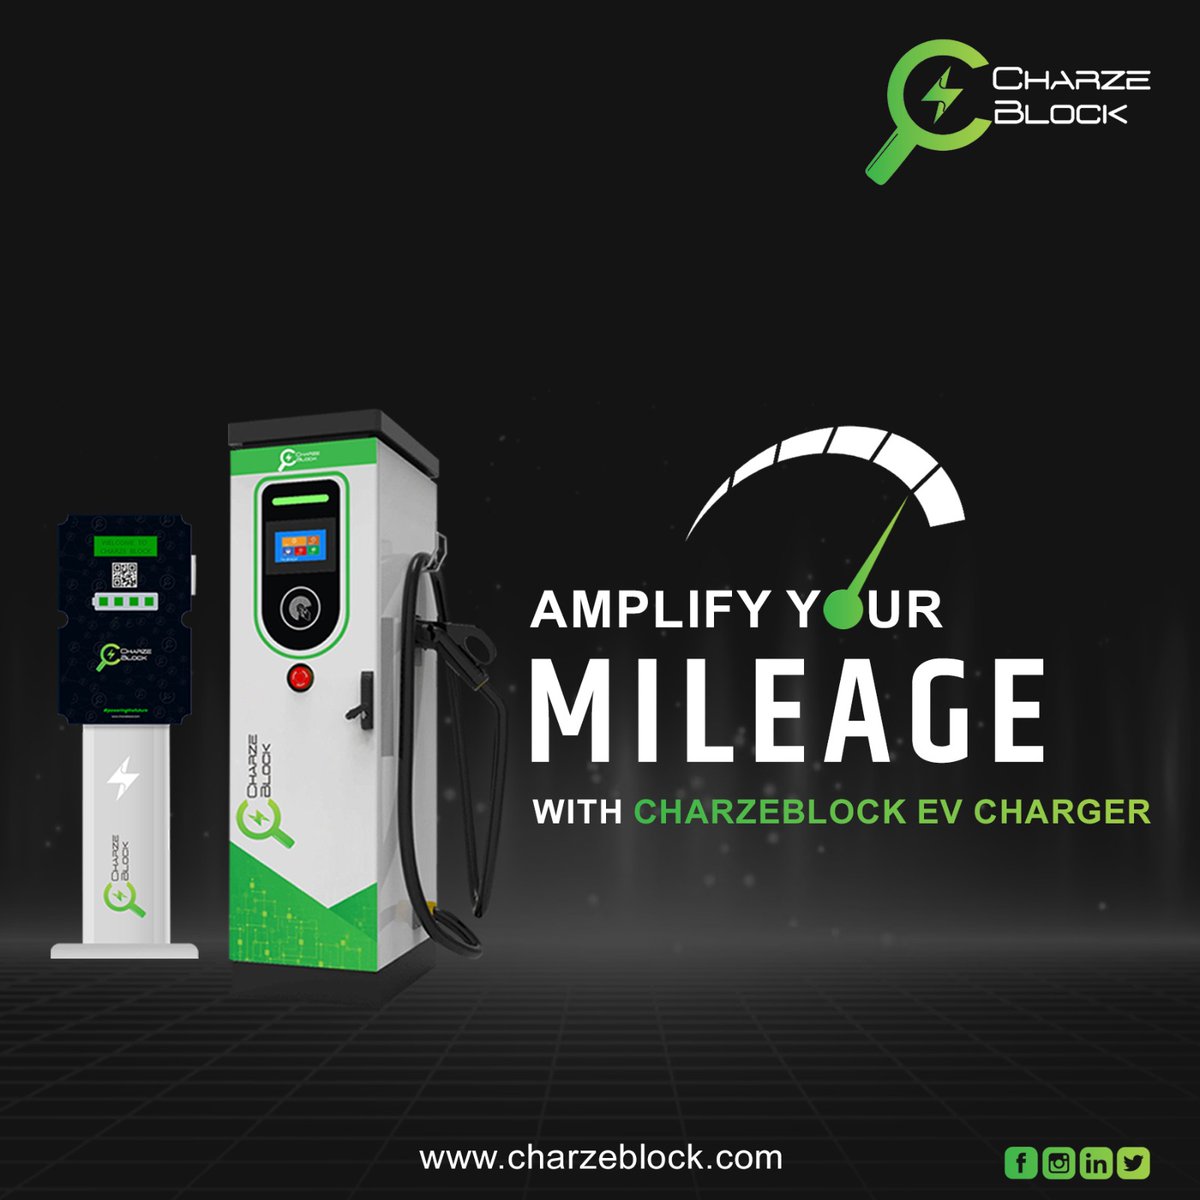 Power up your journey and amplify your #mileage with #Charzeblock EV Charger! ⚡🚗Explore the future of clean, efficient transportation.🌿⚡ #EVcharging #CleanEnergy #CharzeblockCharger #futureofmobility Explore at charzeblock.com